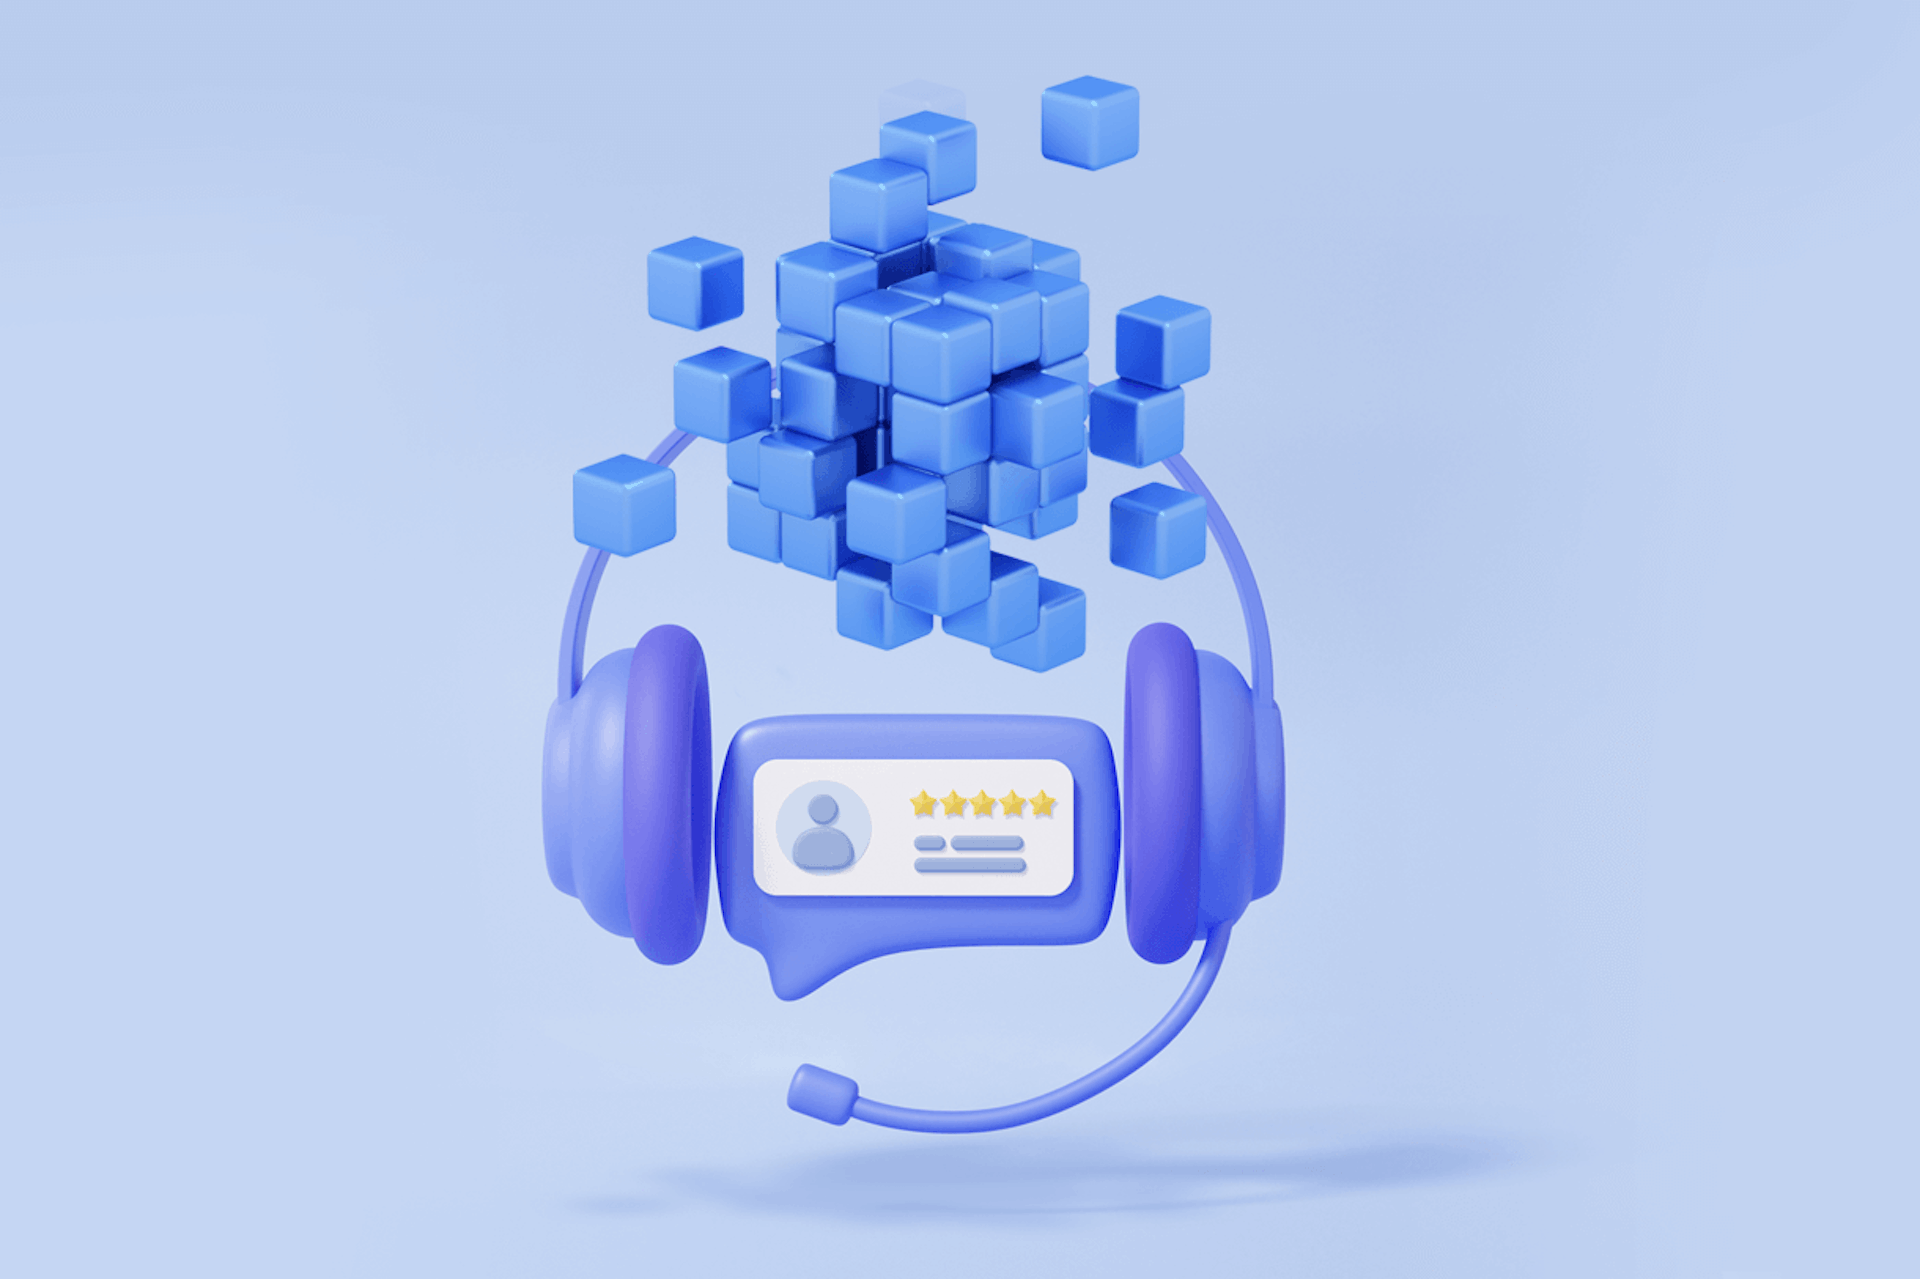 3D Illustration of blue cubes with headphones showcasing customer intelligence